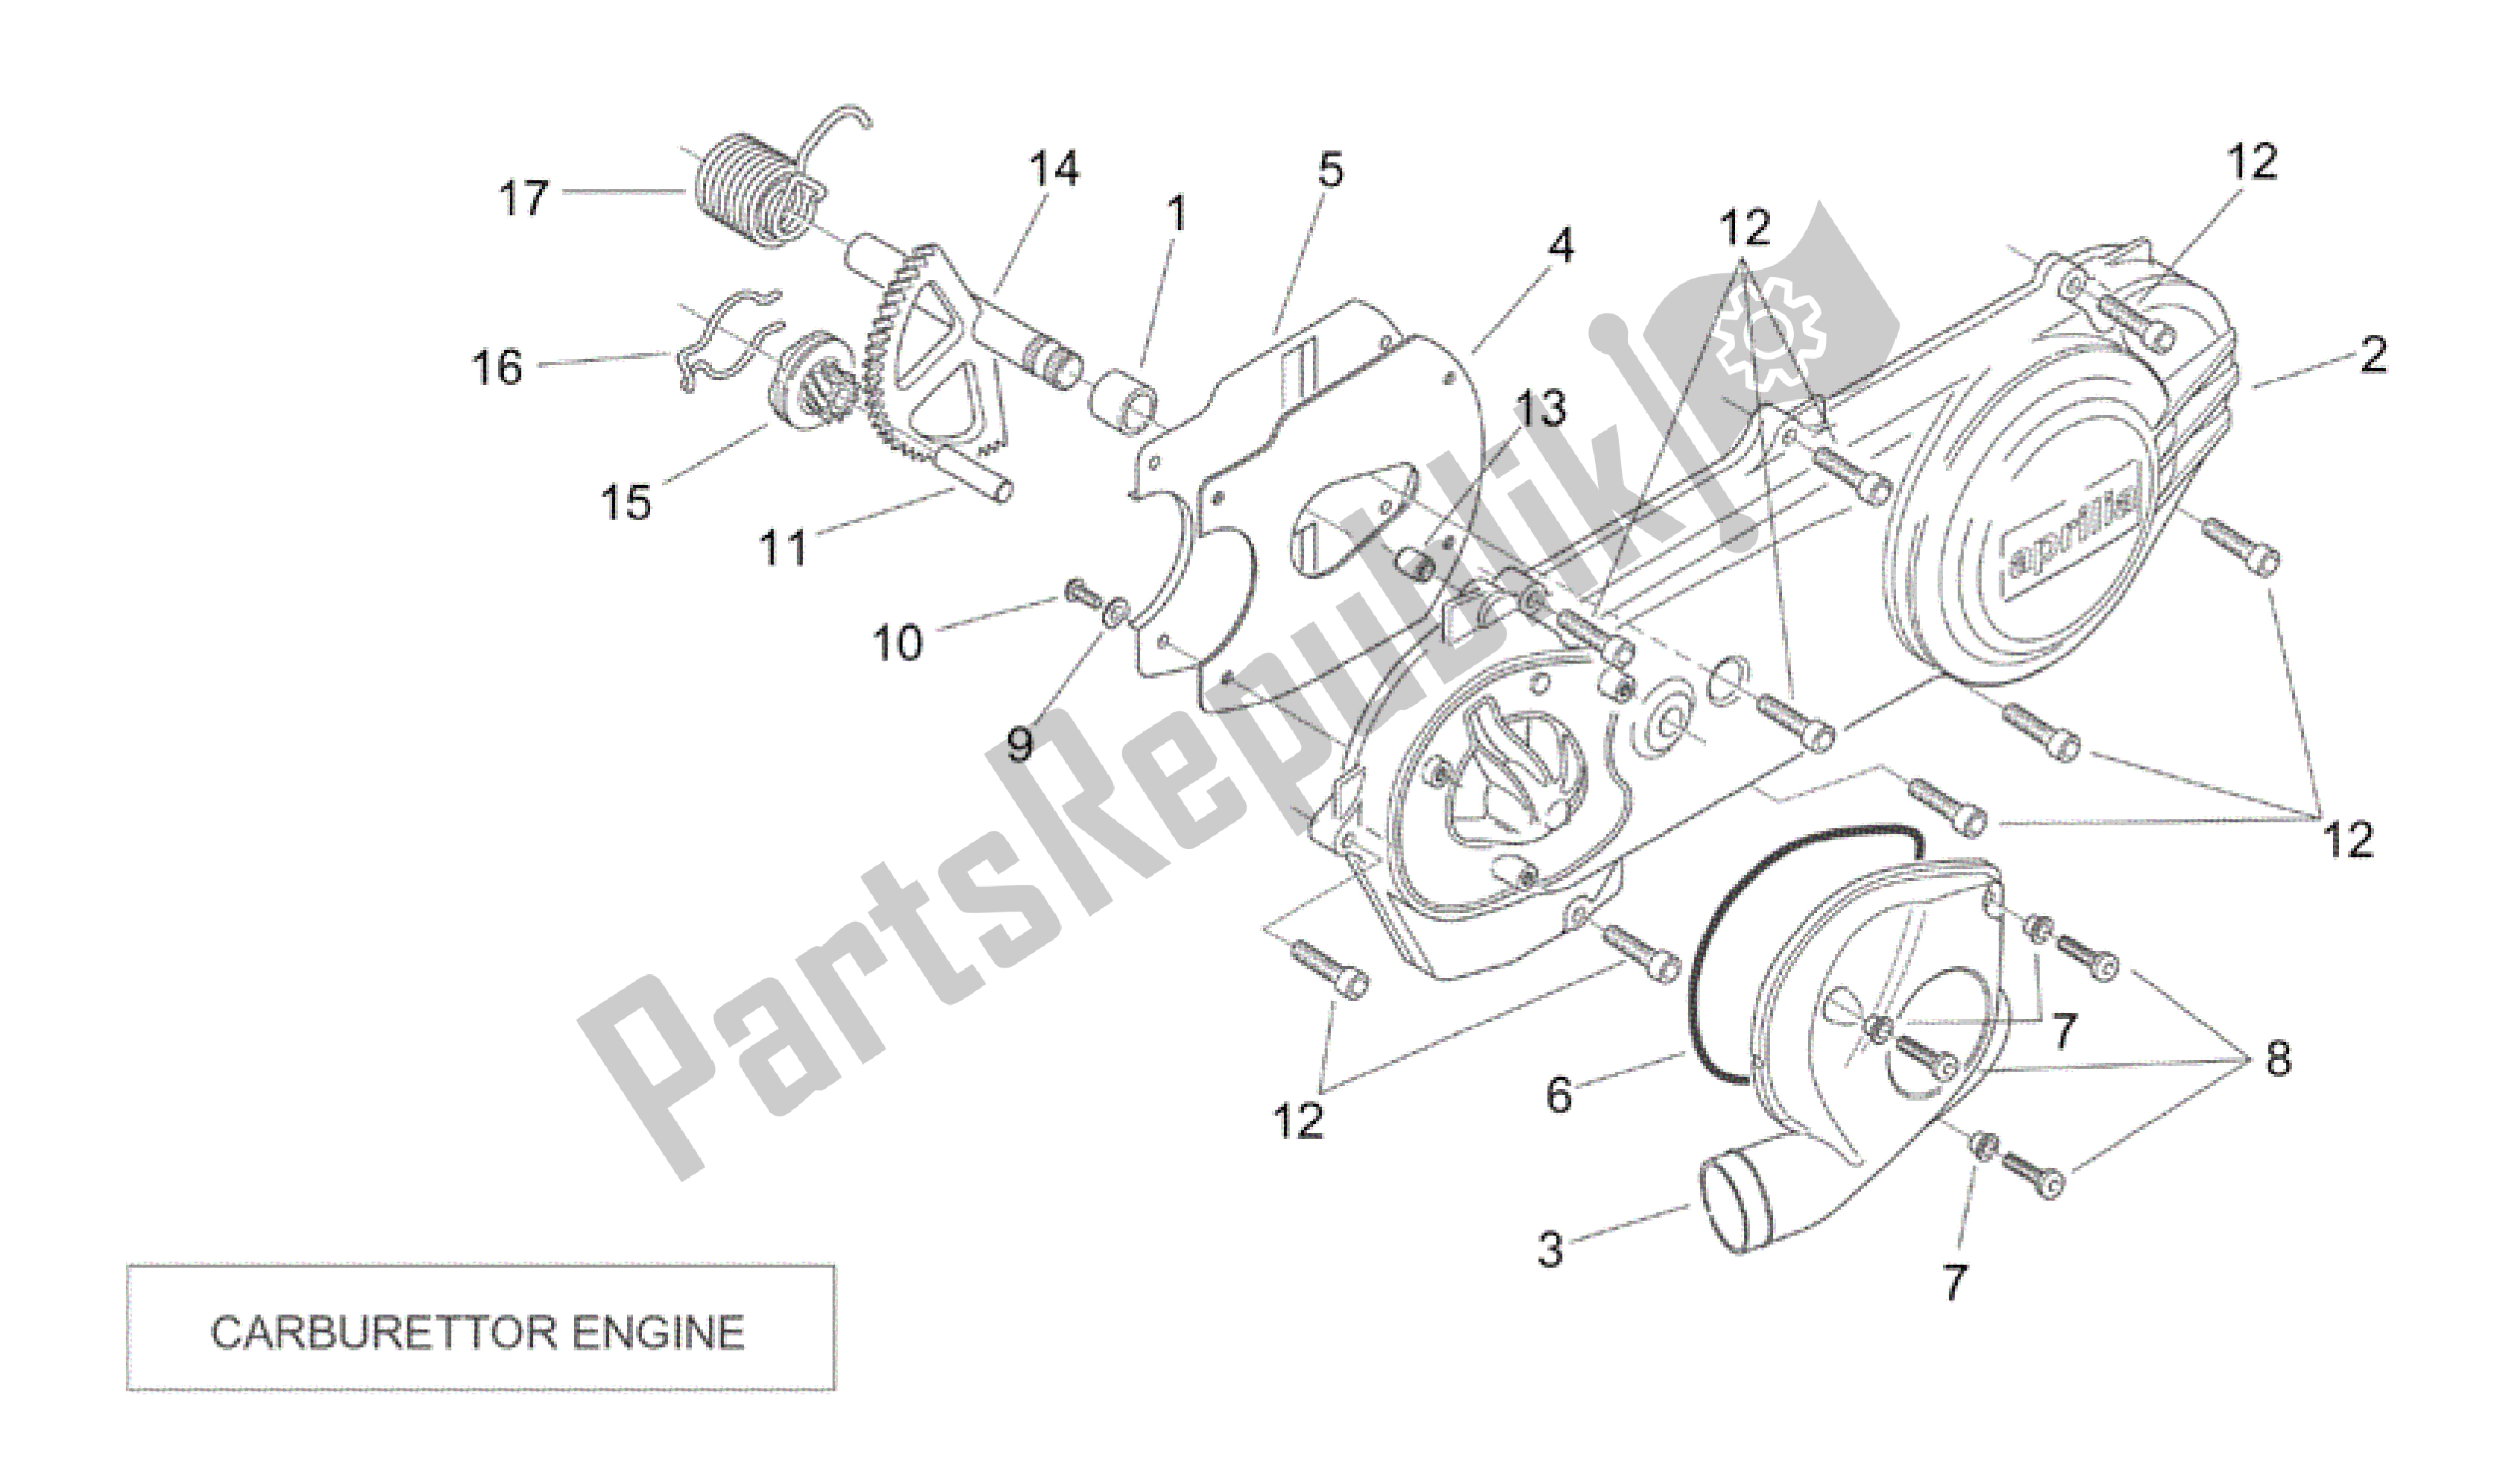 All parts for the Transmission Cover (carburettor) of the Aprilia SR 50 2000 - 2004